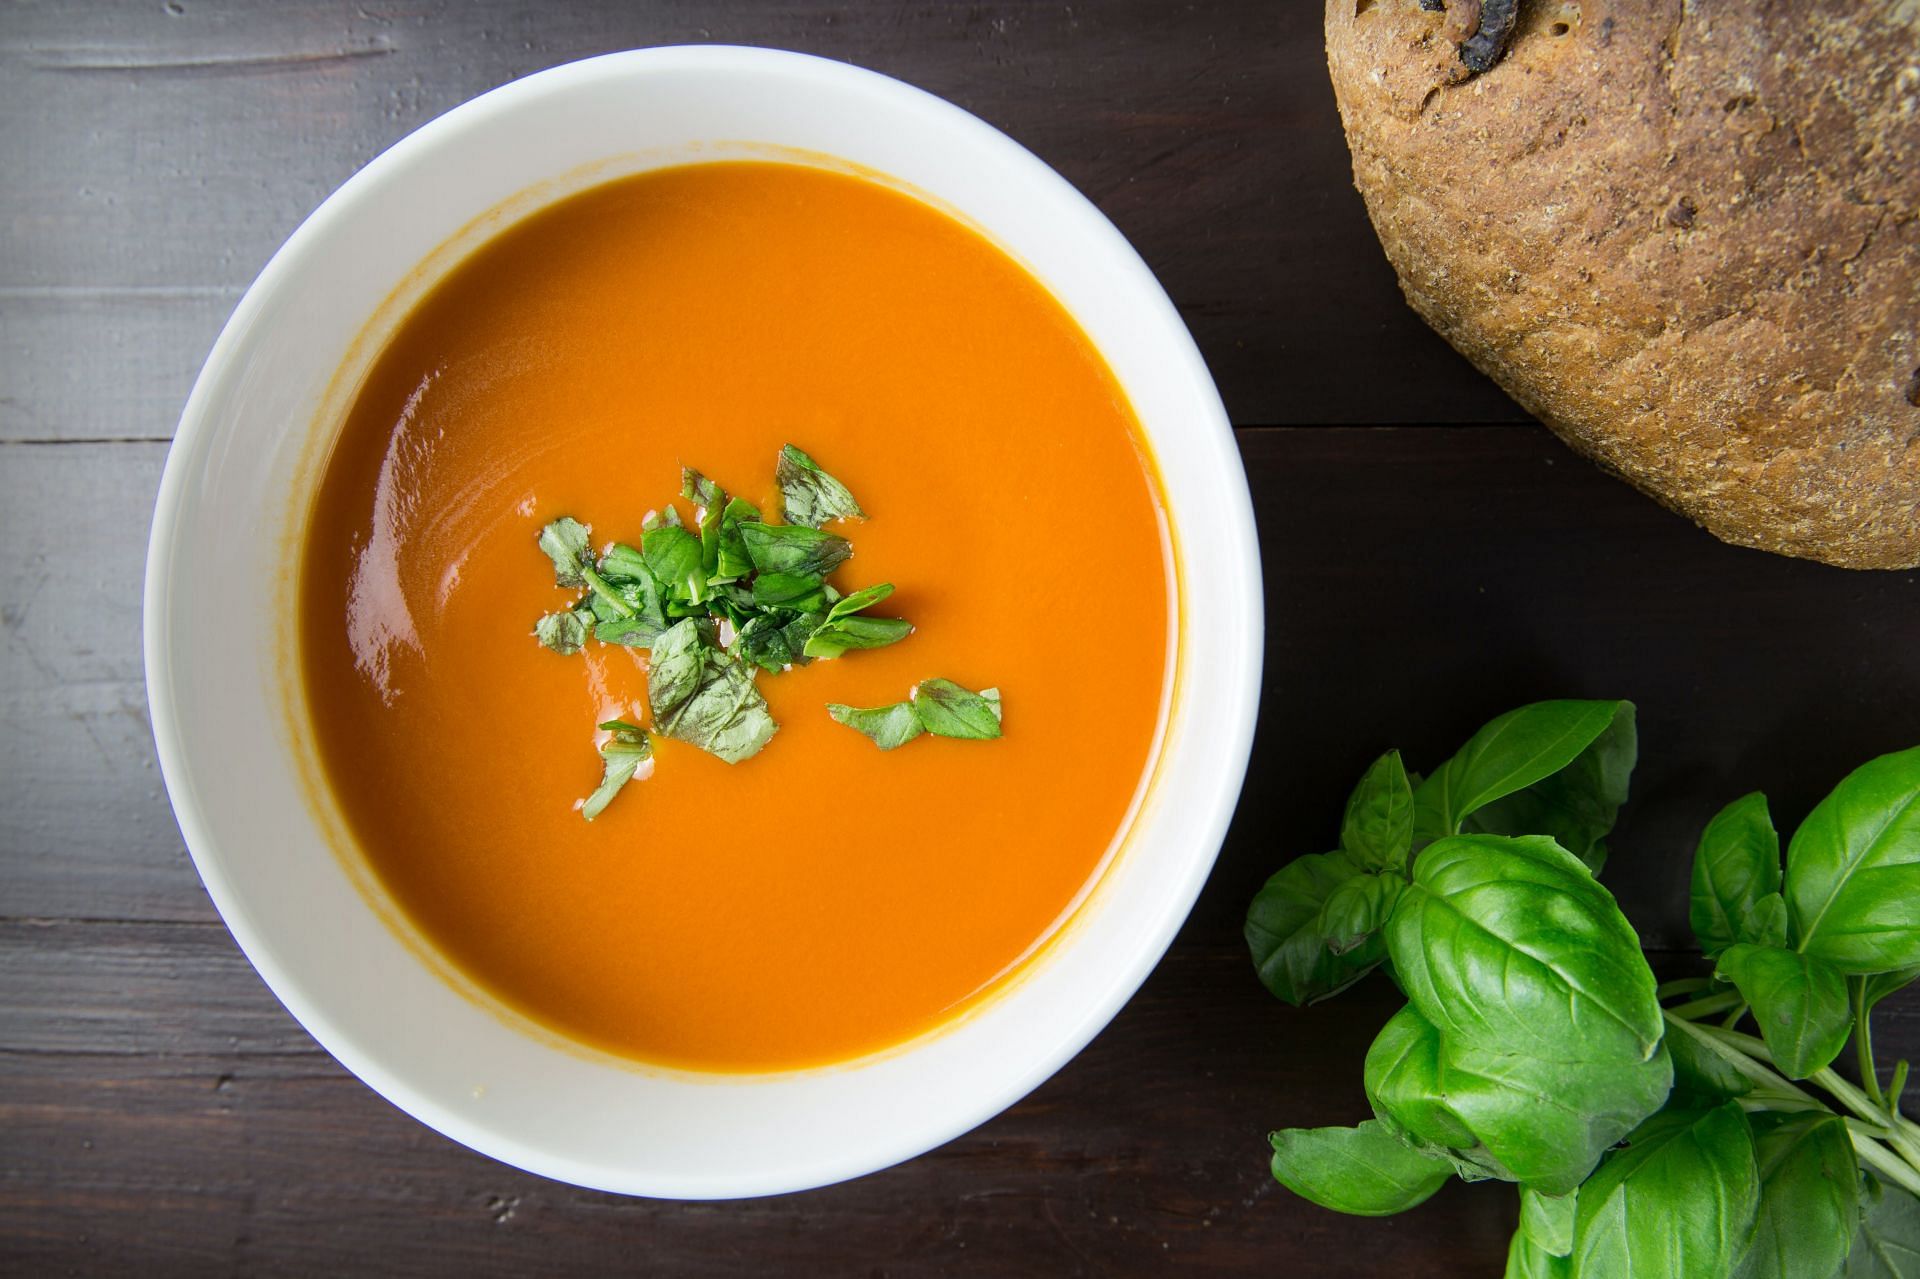 Adding soups in dysgaphia diet (image sourced via Pexels / Photo by Foodie)